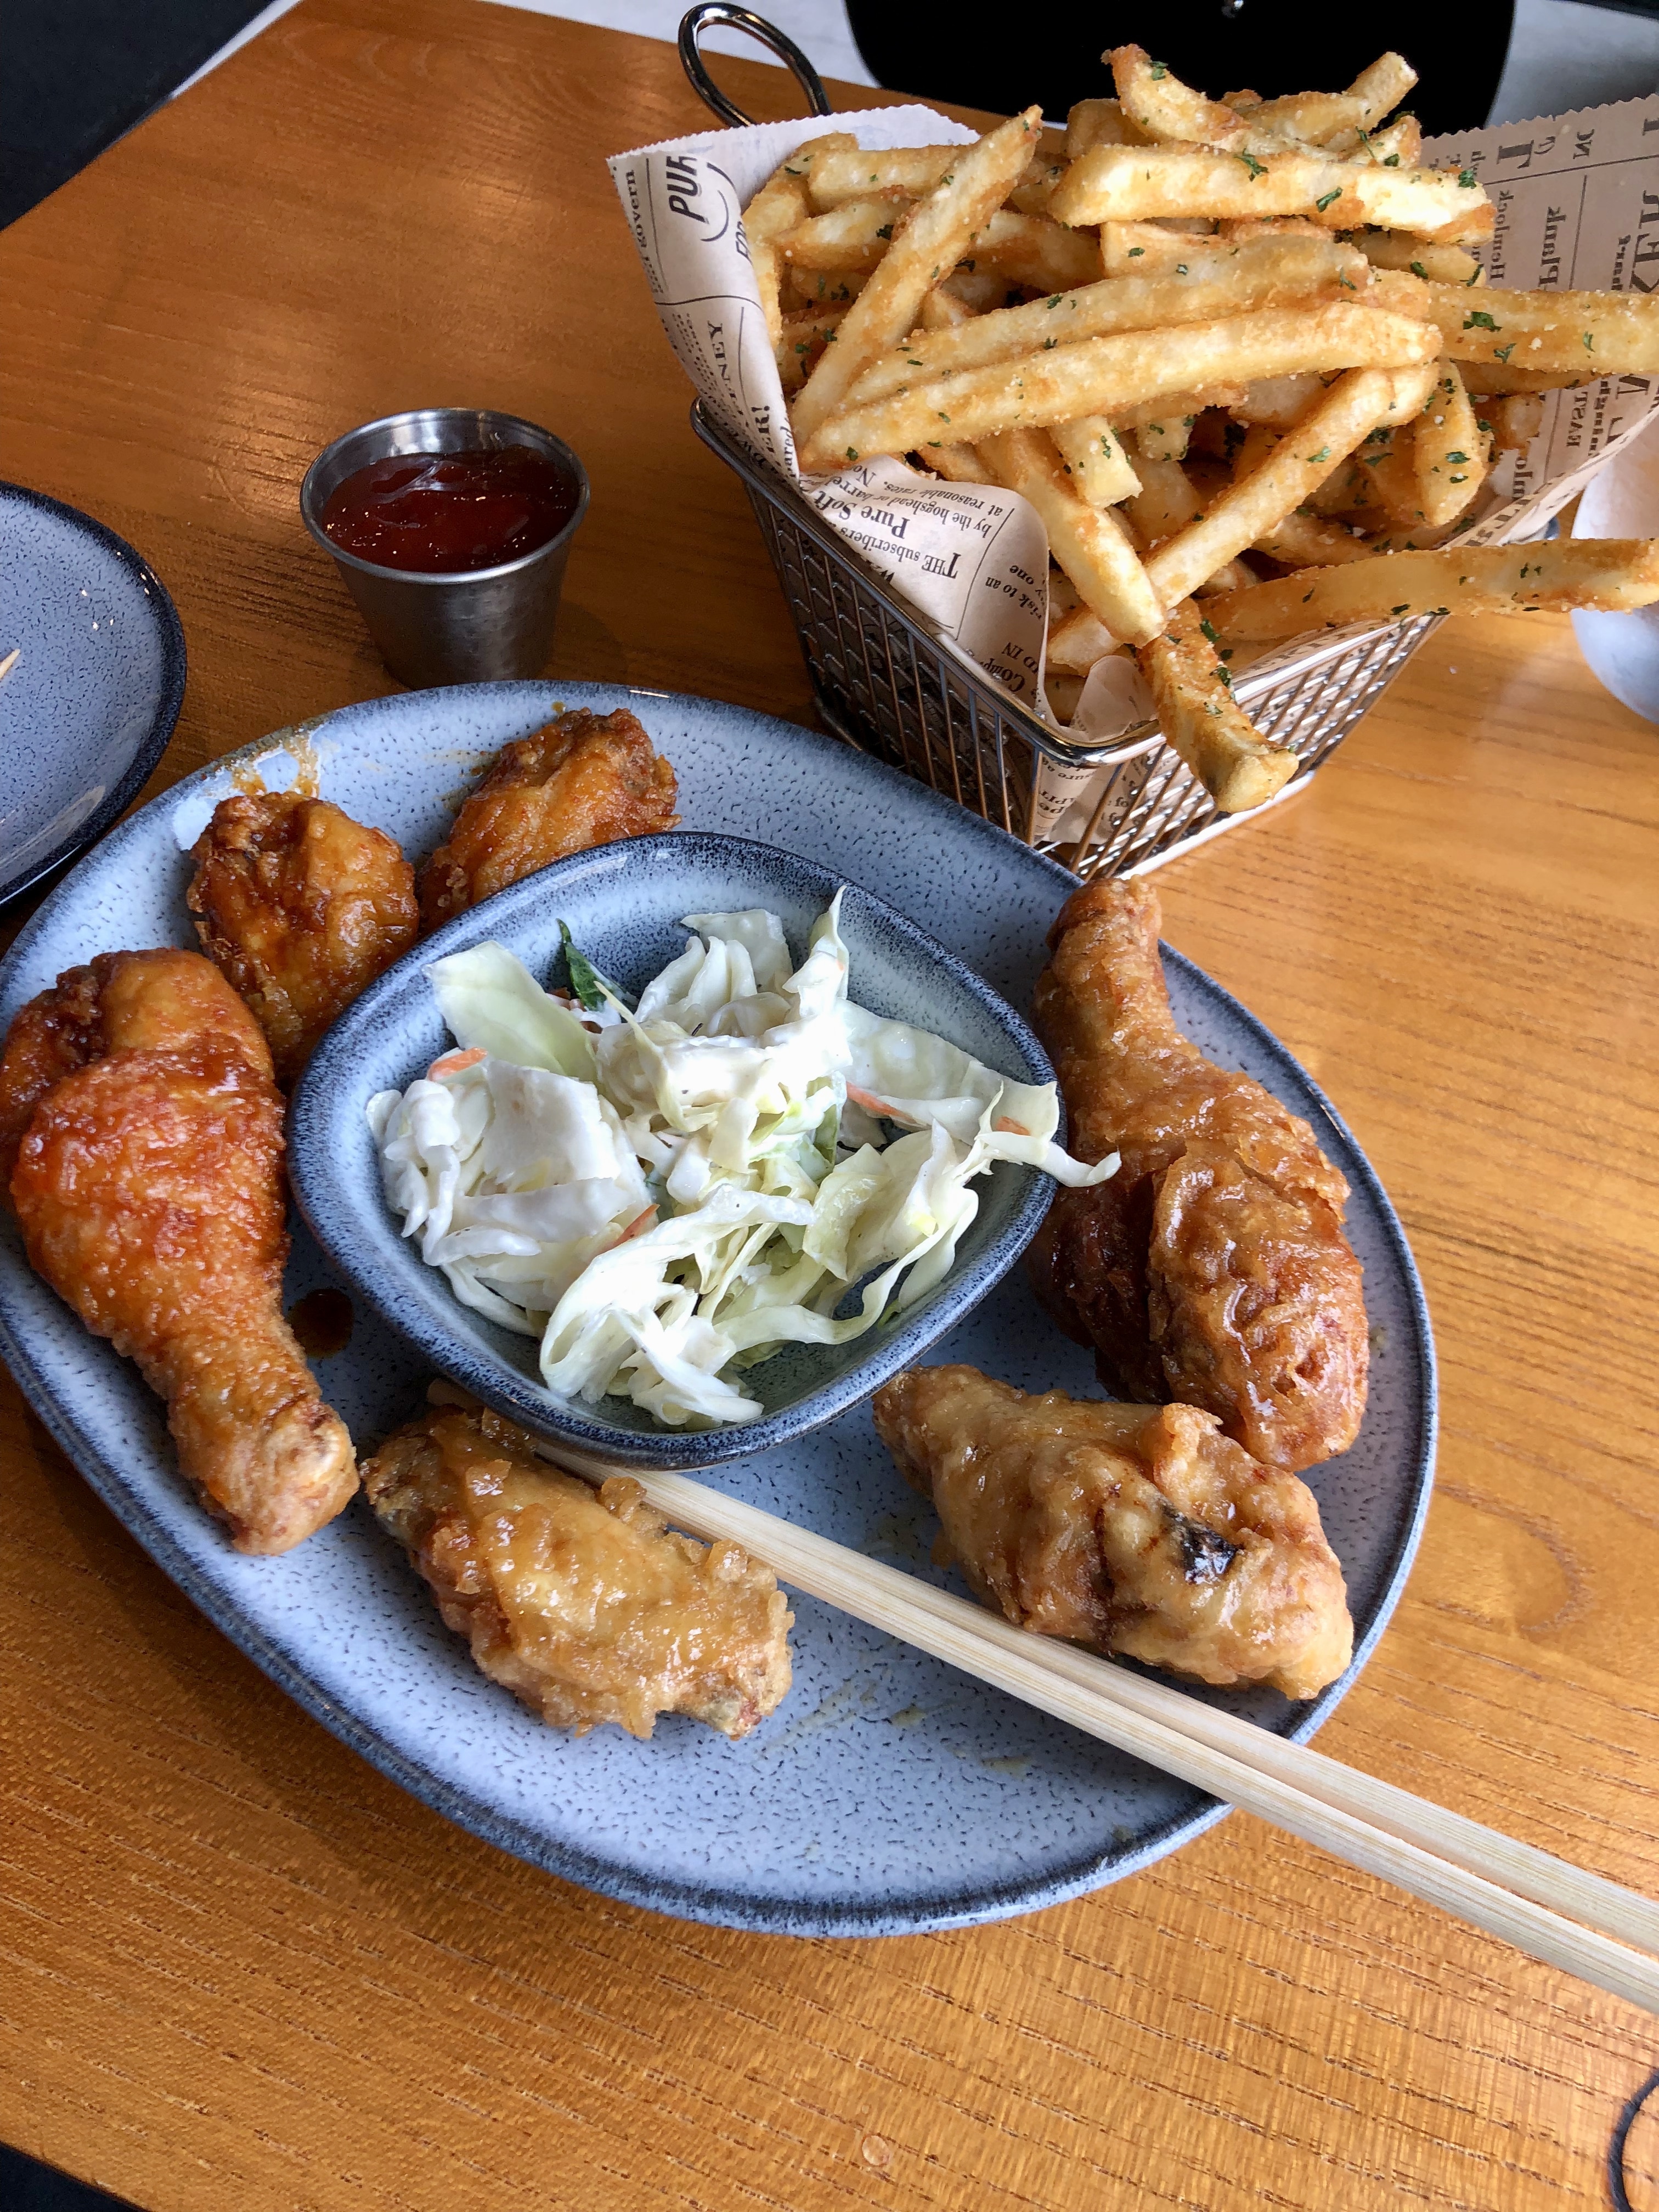 Fried Chicken with Fries and Slaw